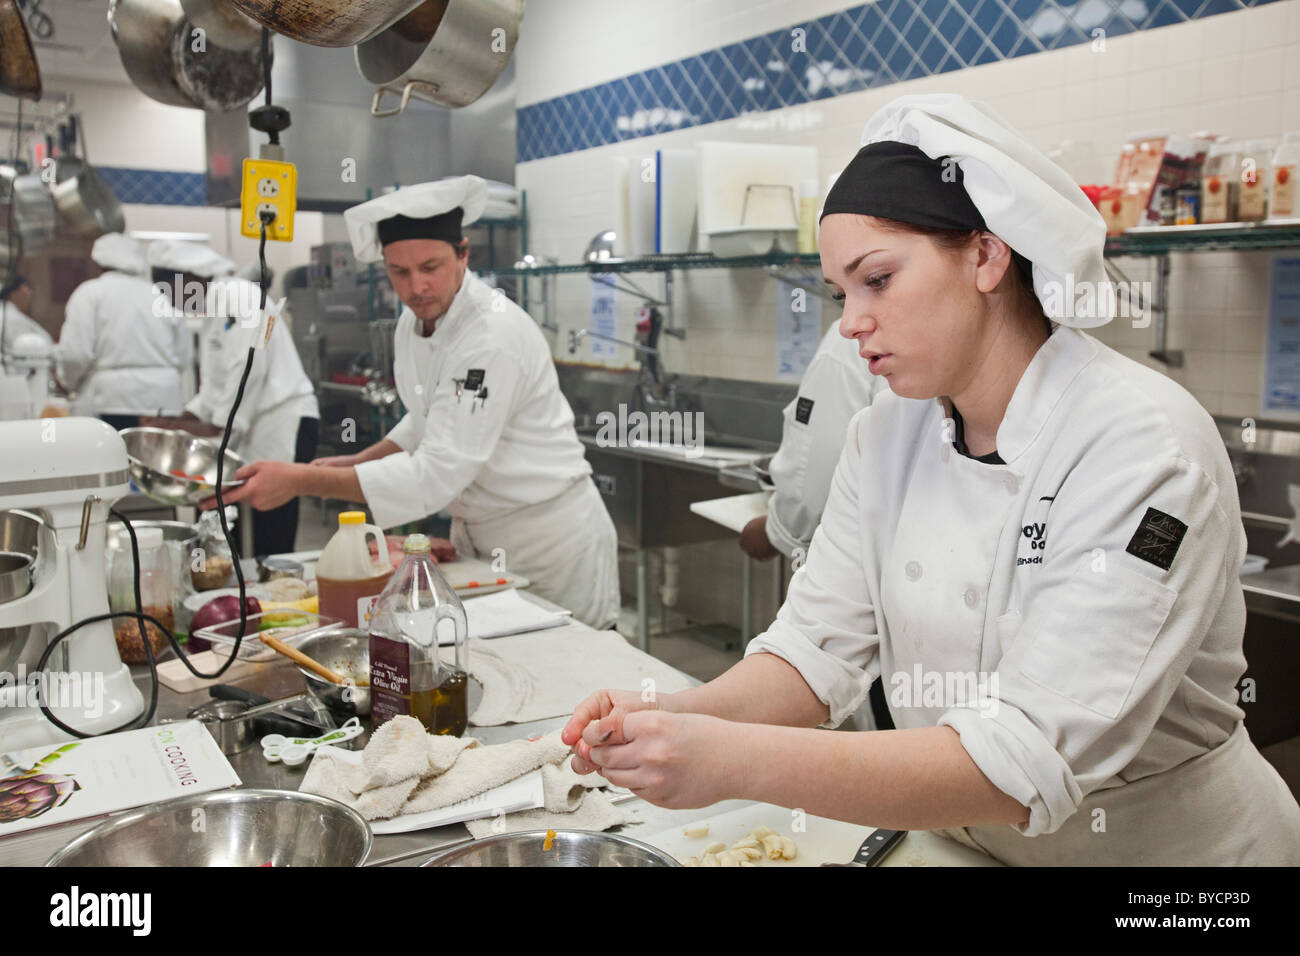 Roseville, Michigan - A student prepares food at the Dorsey Culinary Academy, a private career training school. Stock Photo